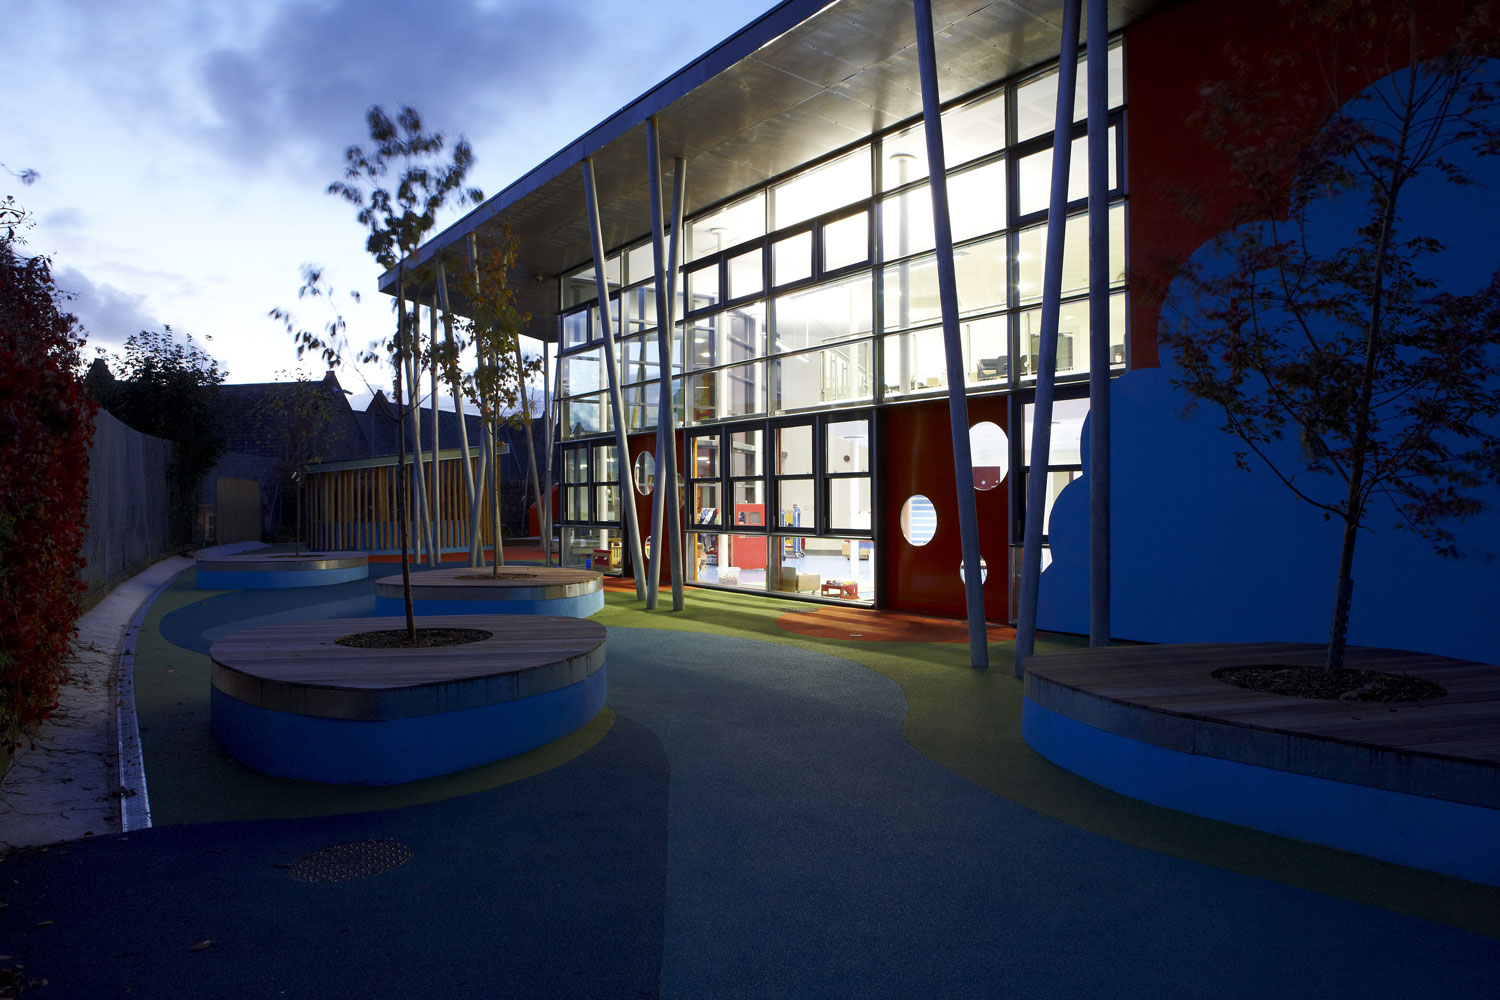 Ellacombe School Torquay at Play | Architectural Photographers UK